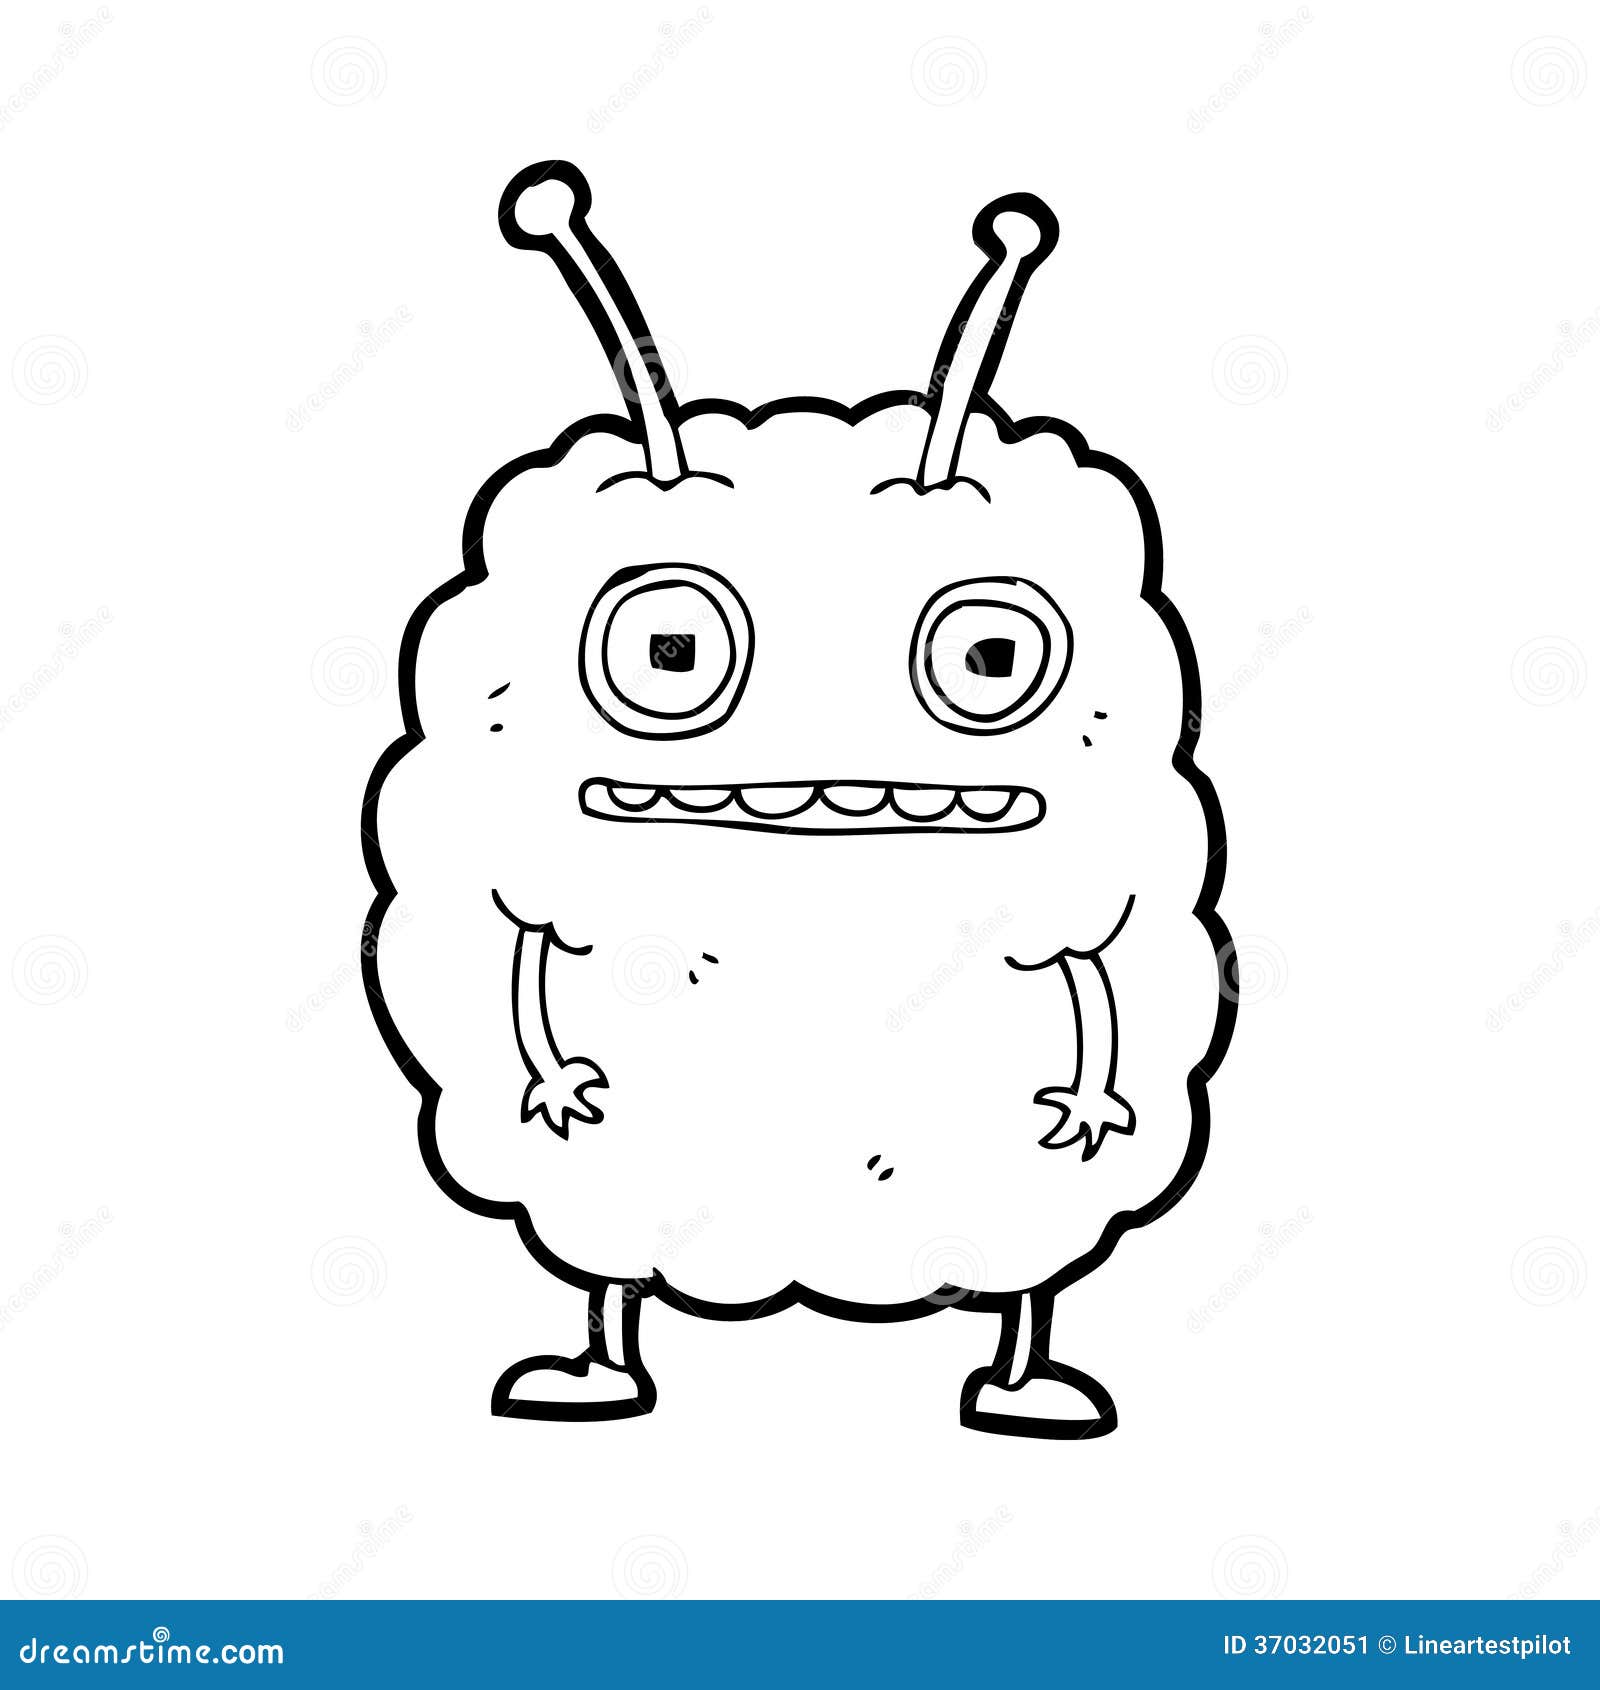 free black and white monster clipart - photo #50